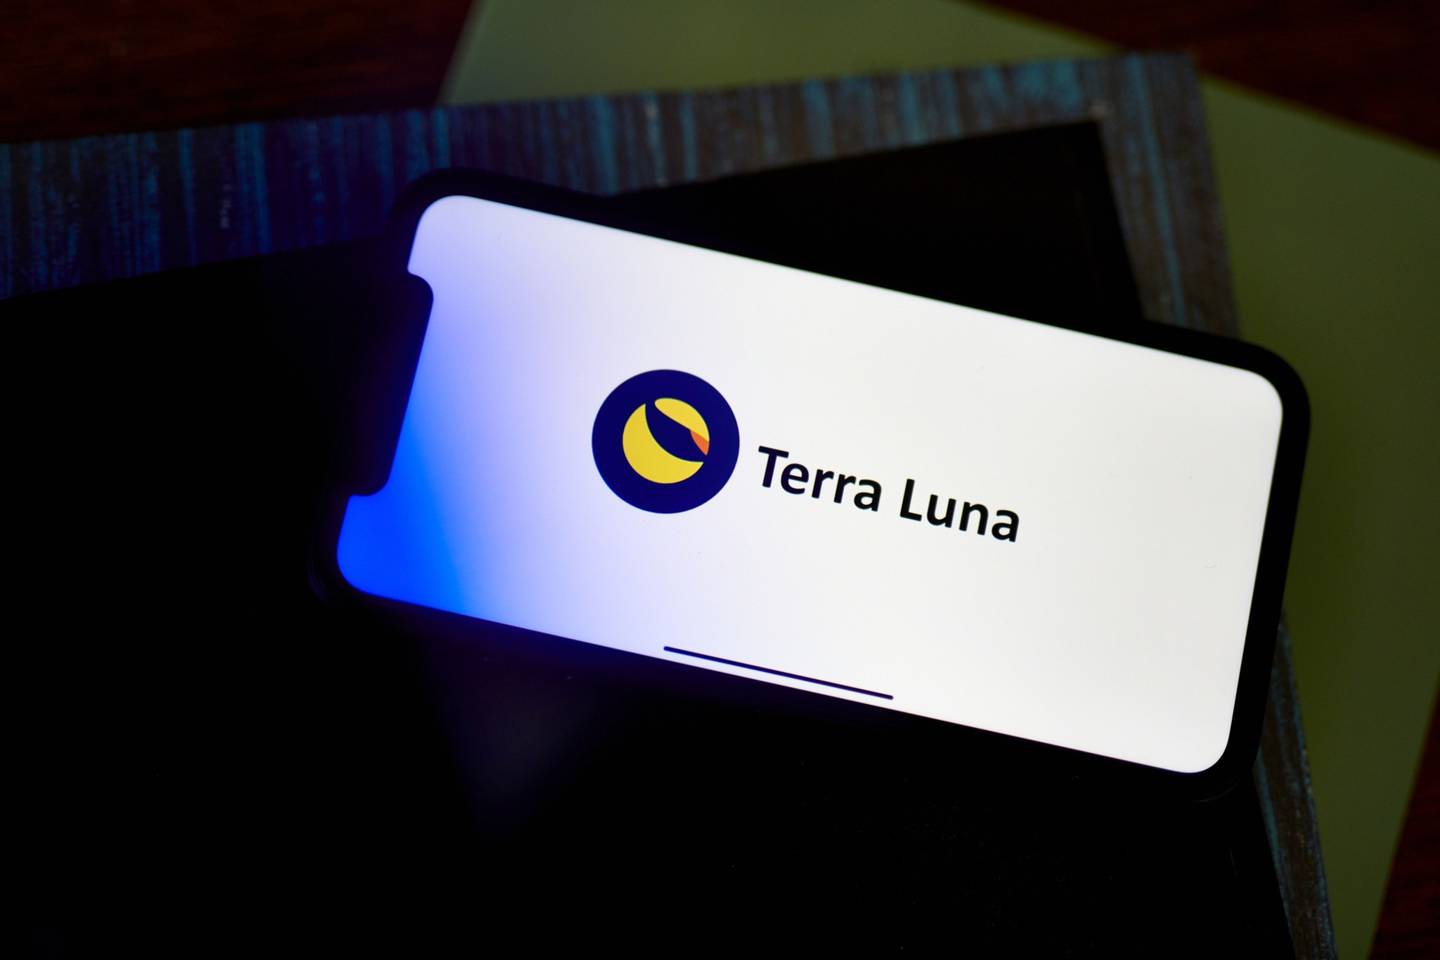 The Terra Luna stablecoin logo on a smartphone arranged in the Brooklyn borough of New York.